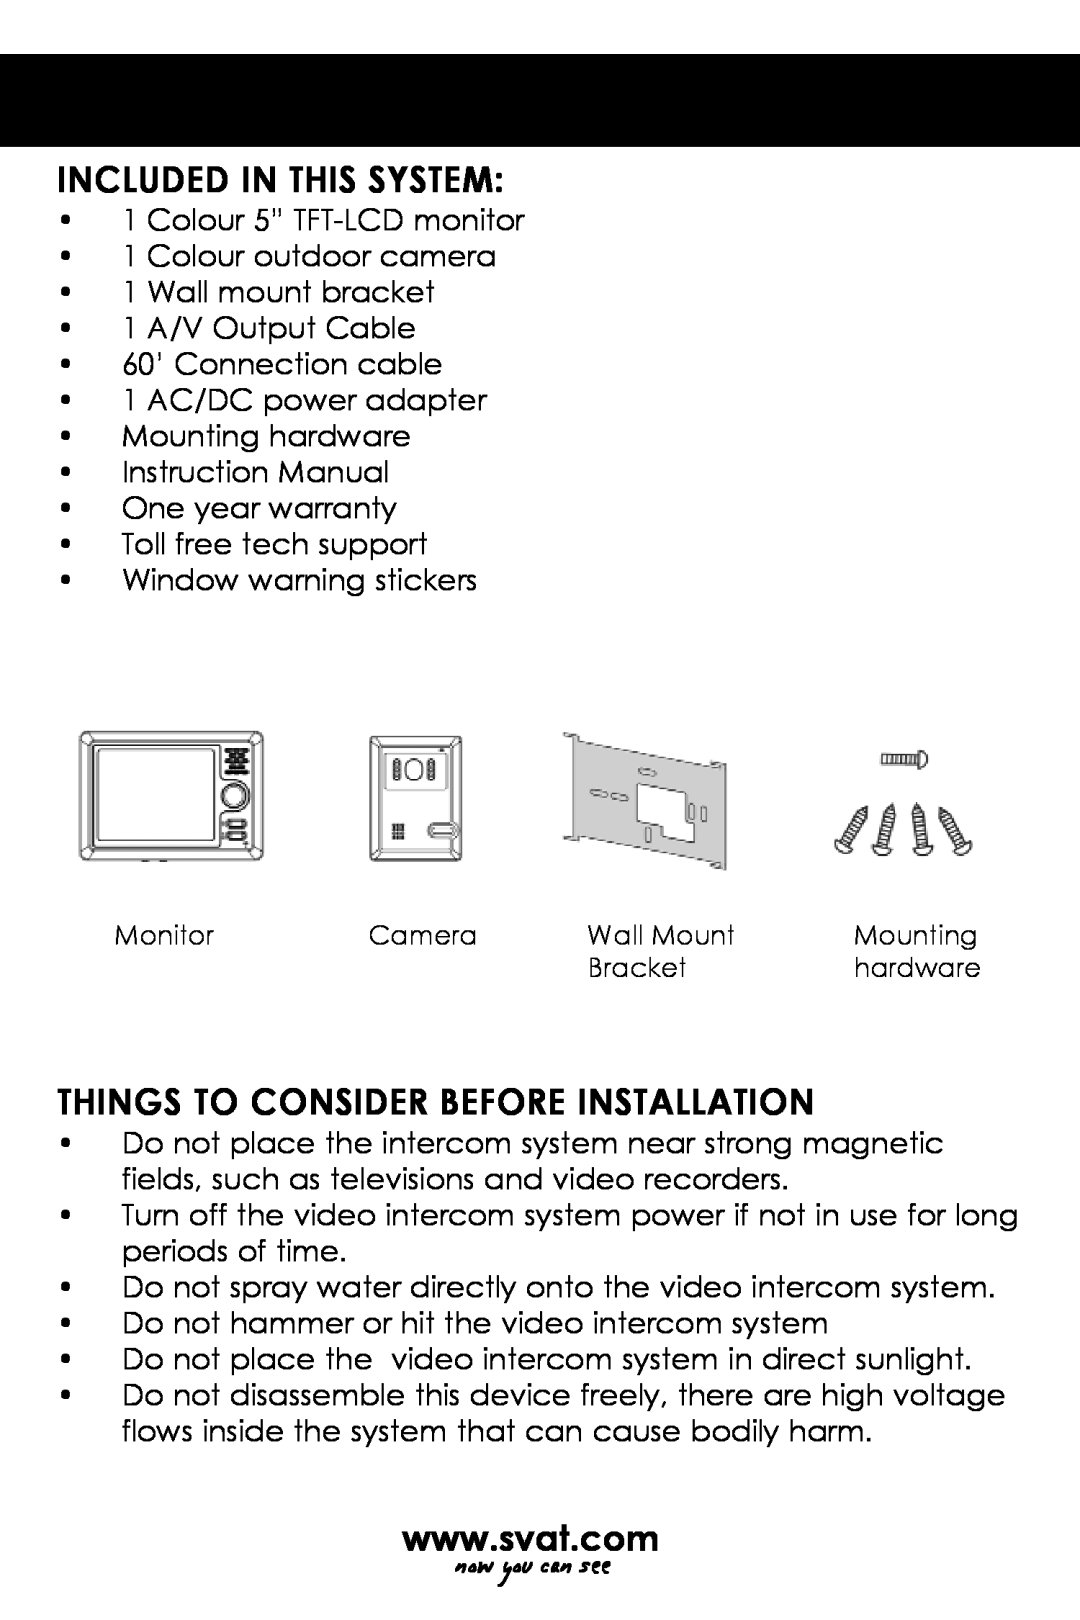 SVAT Electronics VISS7500 user manual Included In This System, Things To Consider Before Installation 